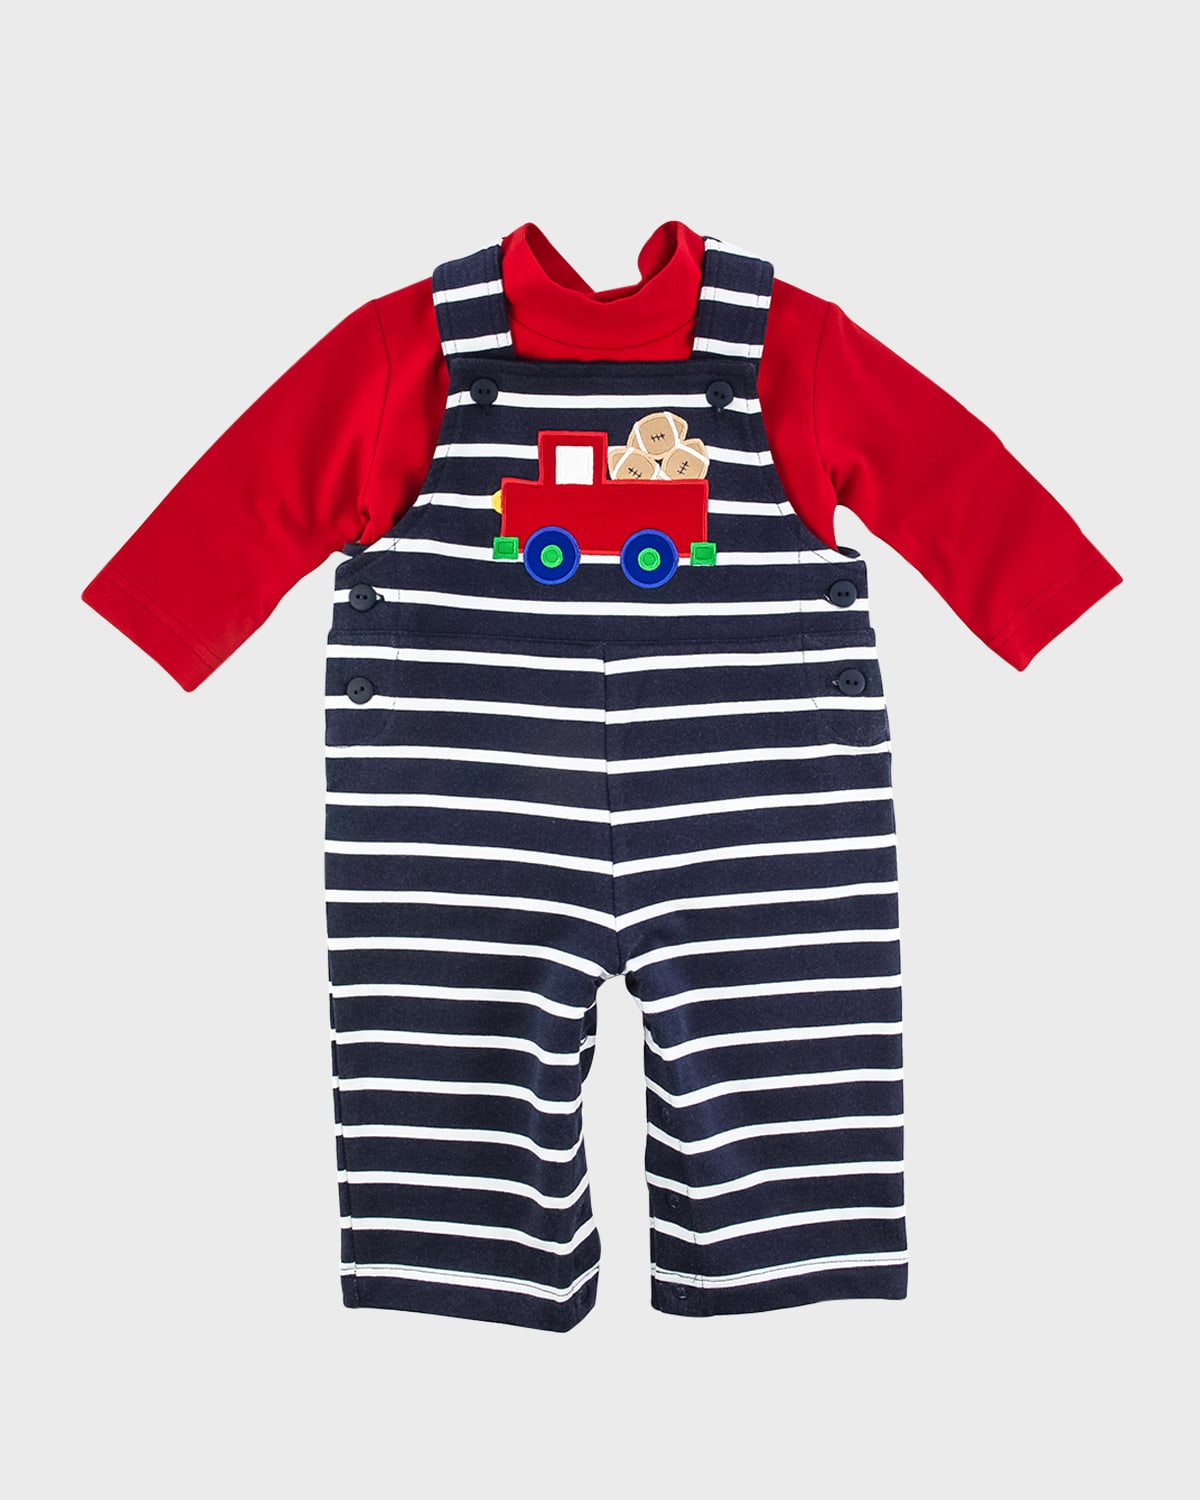 Boy's Striped Embroidered Overall W/ Shirt Set, Size 6M-24M